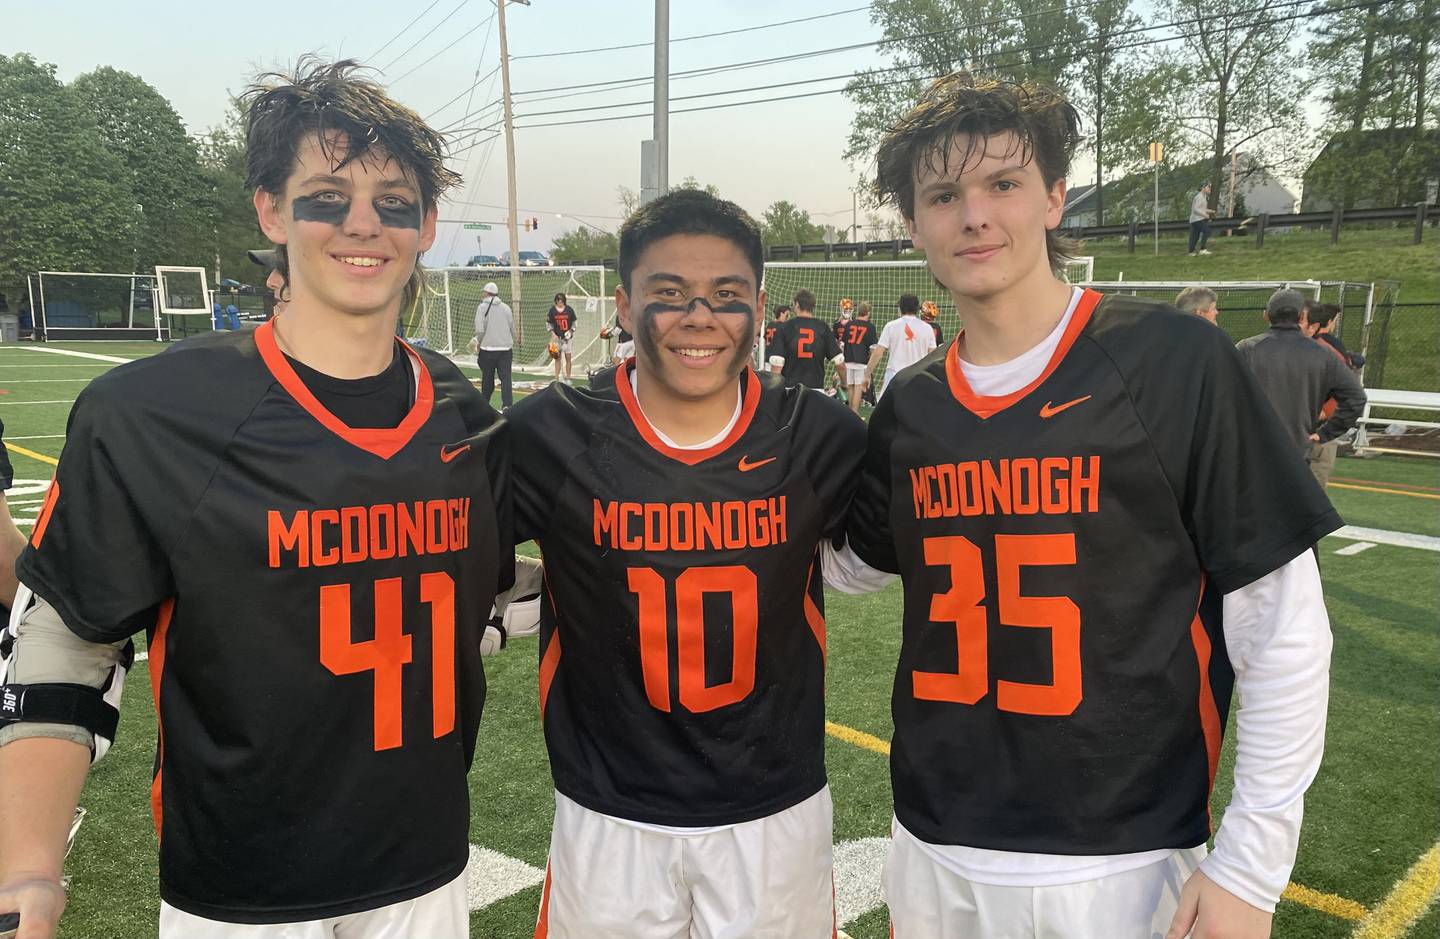 Brendan Millon, Zach Hayashi and Aiden Seibel helped put McDonogh lacrosse back in the win column Tuesday evening. Millon scored twice, Hayashi finished 11-of-14 on faceoffs and Seibel had 13 saves in his first varsity start as the No. 2 Eagles defeated No. 4 St. Mary's in a rematch of last spring's MIAA A Conference lacrosse title game at Pascal Field in Annapolis.